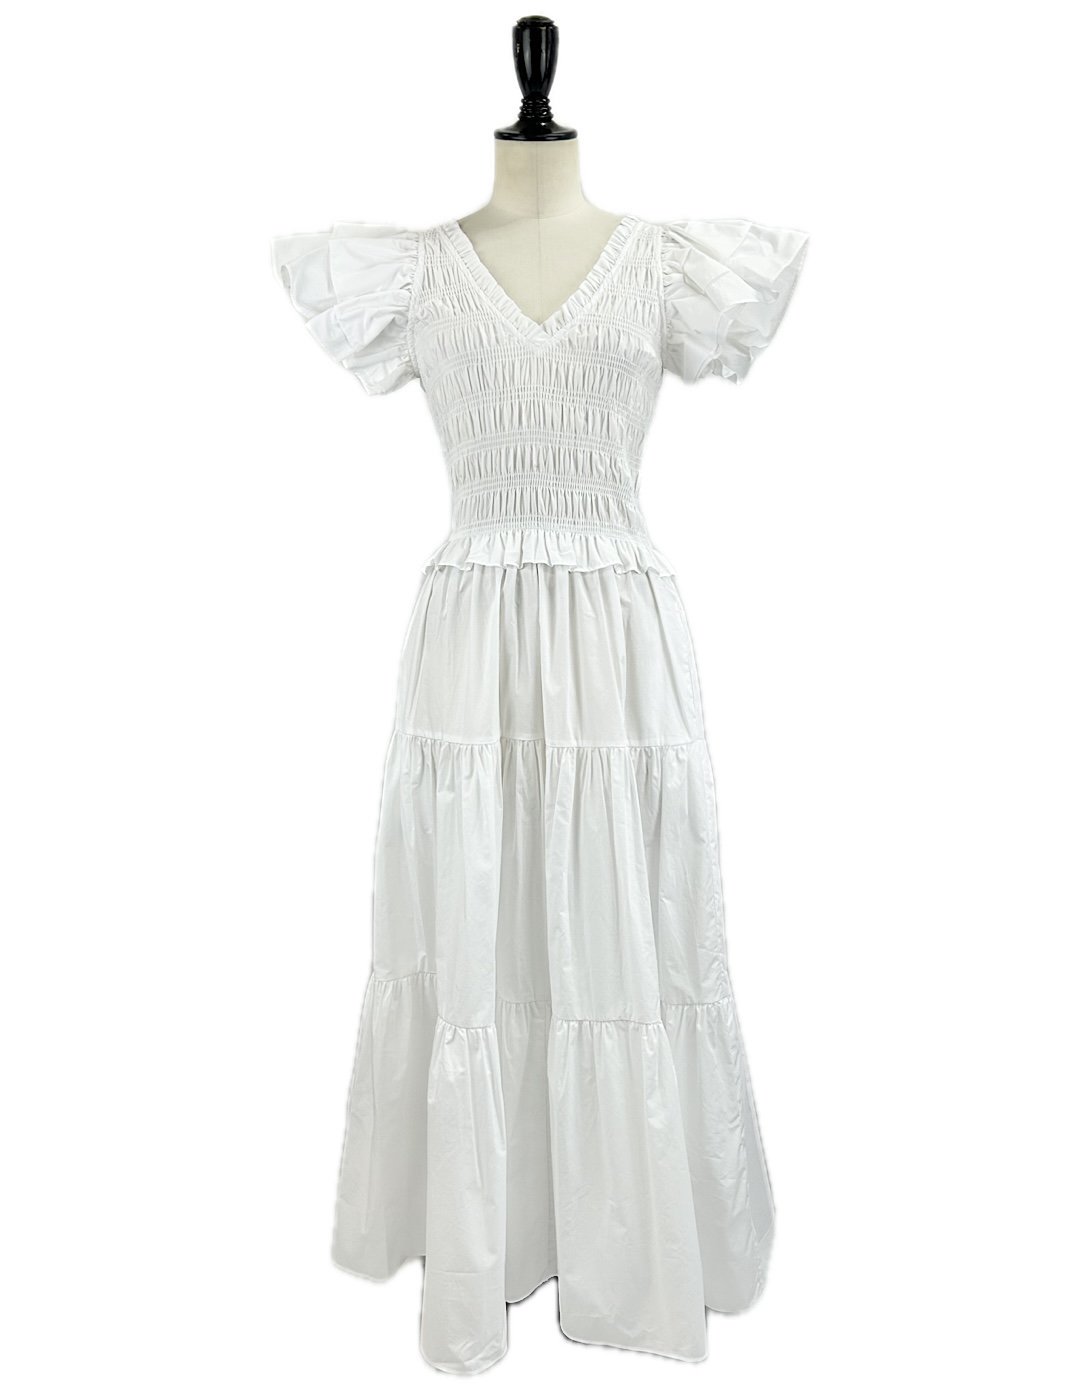 <img class='new_mark_img1' src='https://img.shop-pro.jp/img/new/icons6.gif' style='border:none;display:inline;margin:0px;padding:0px;width:auto;' />30offMEIMEIJ / COTTON LONG DRESS